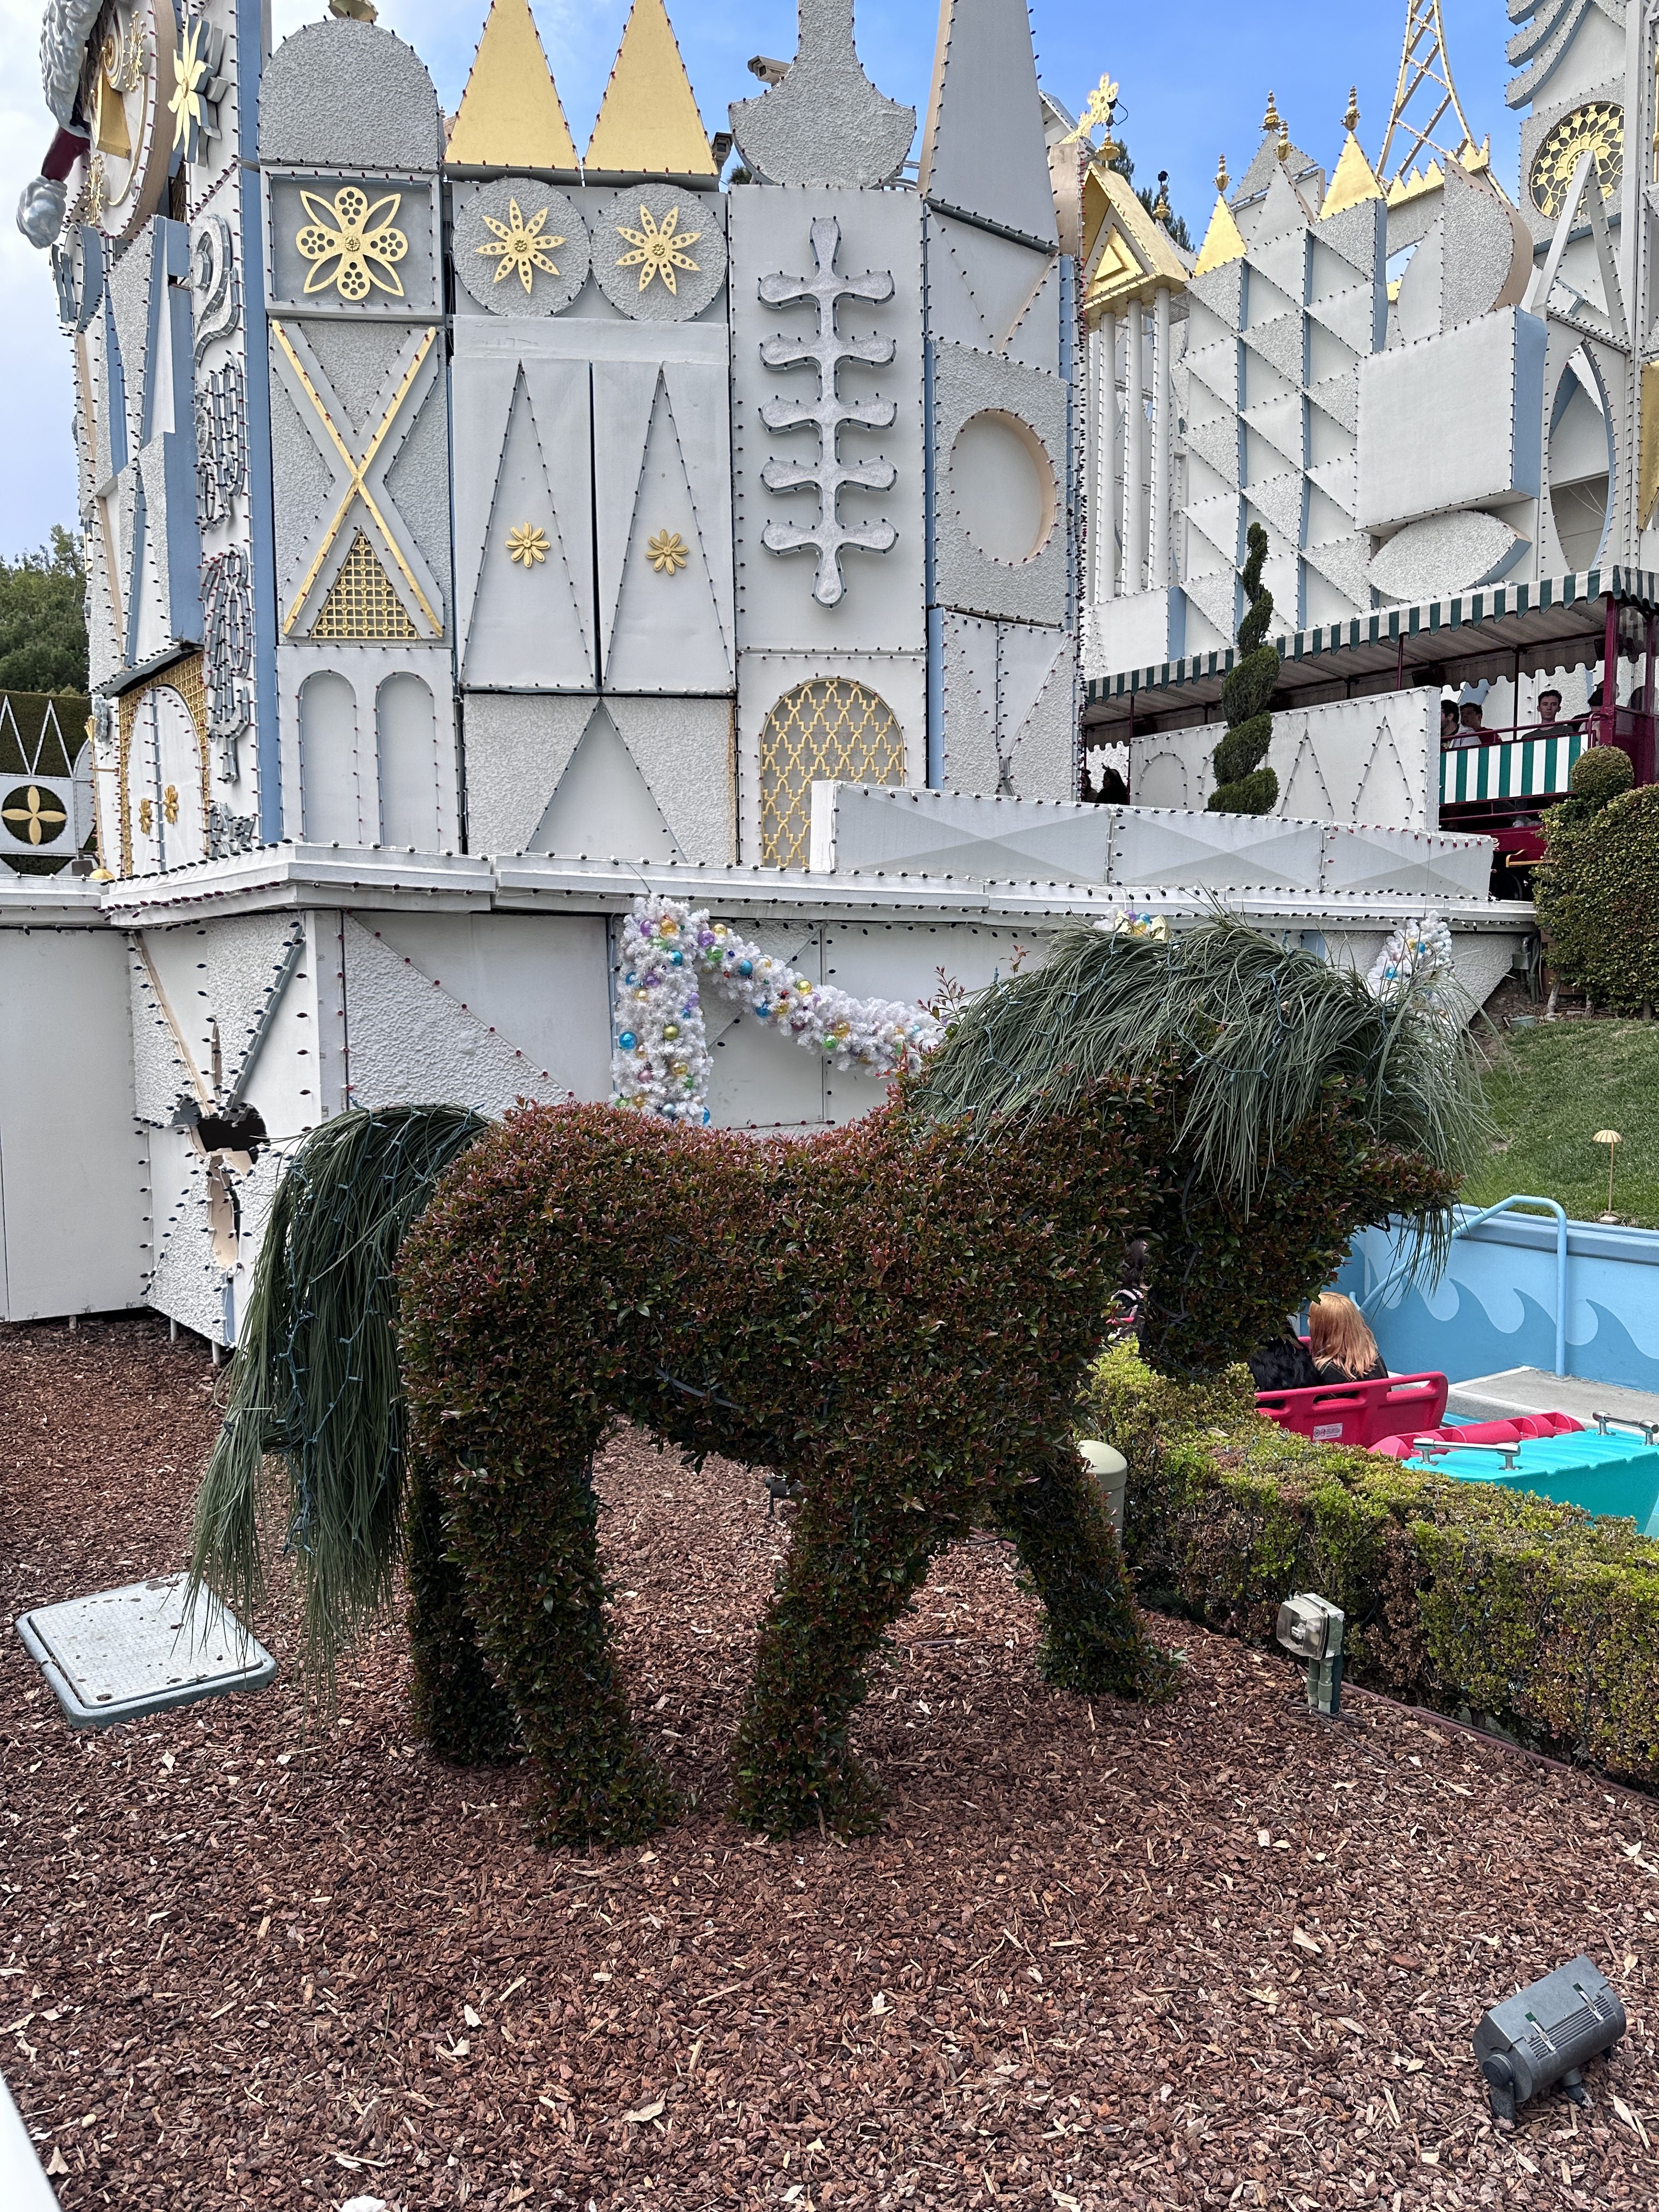 pony hedge at it's a small world holiday cool photographic style